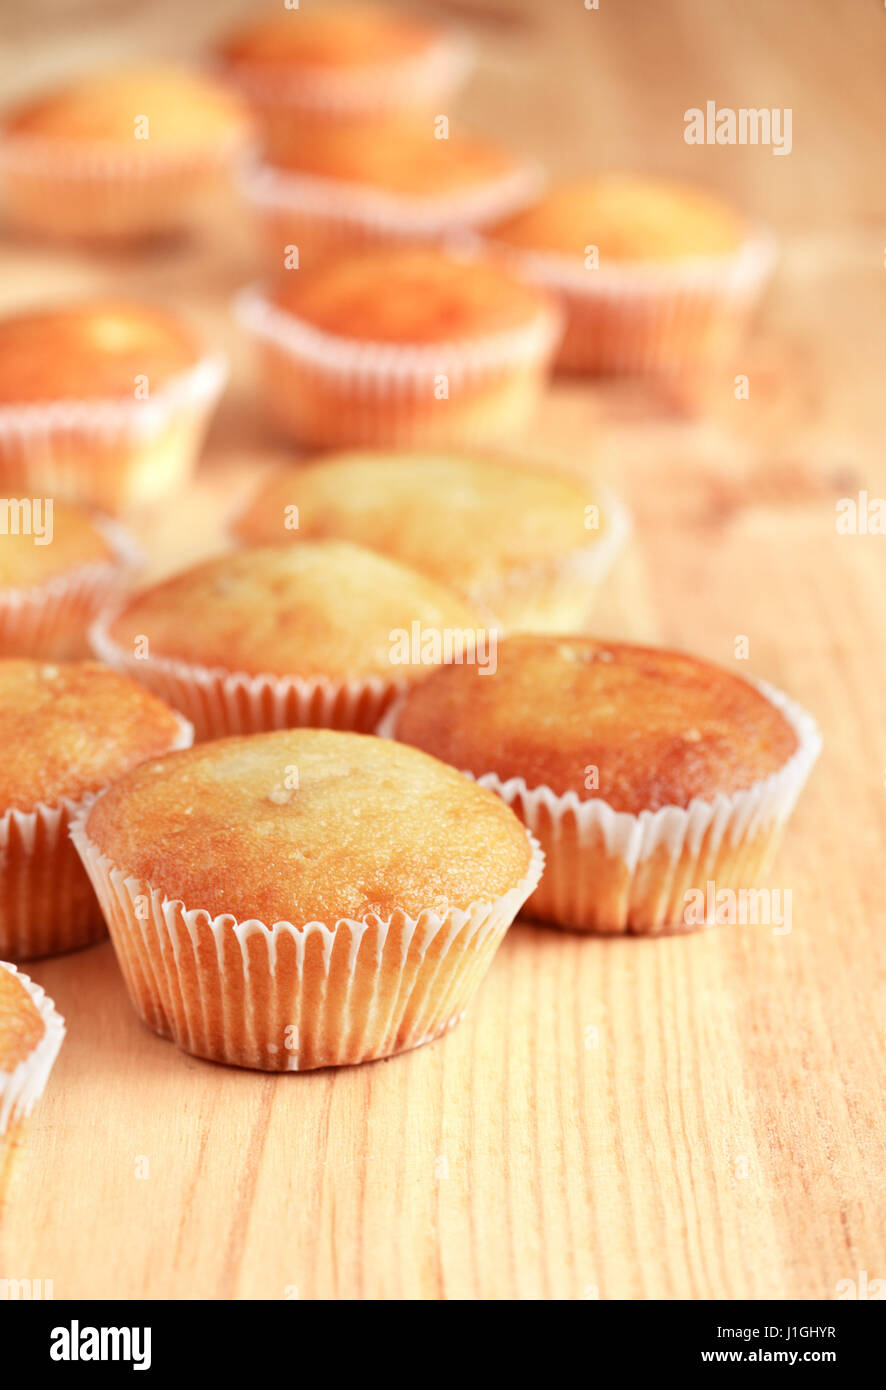 Set of  fresh-baked muffins on wooden surface Stock Photo